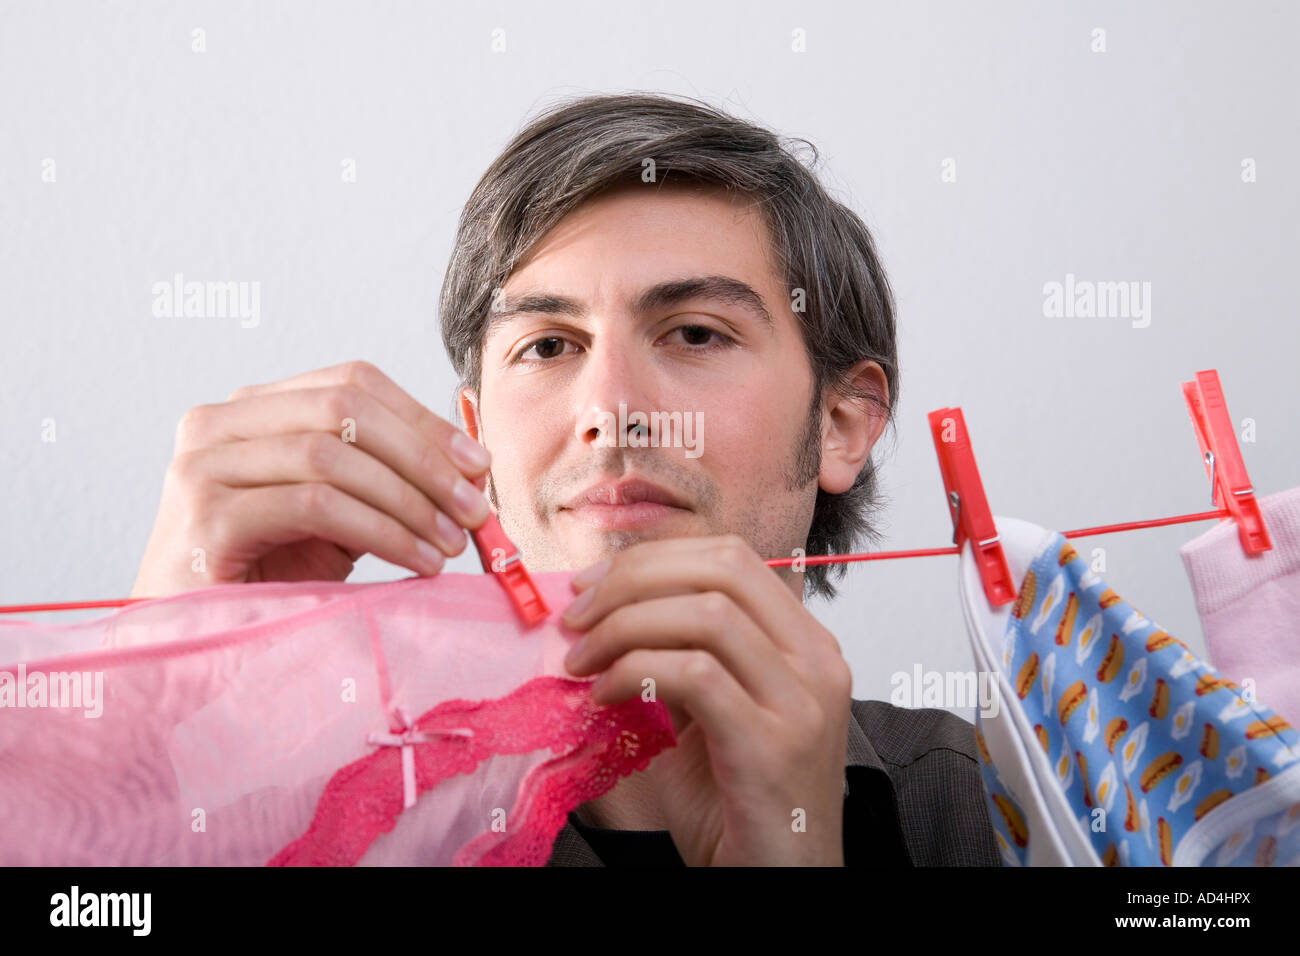 A man hanging underwear on a clothesline Stock Photo